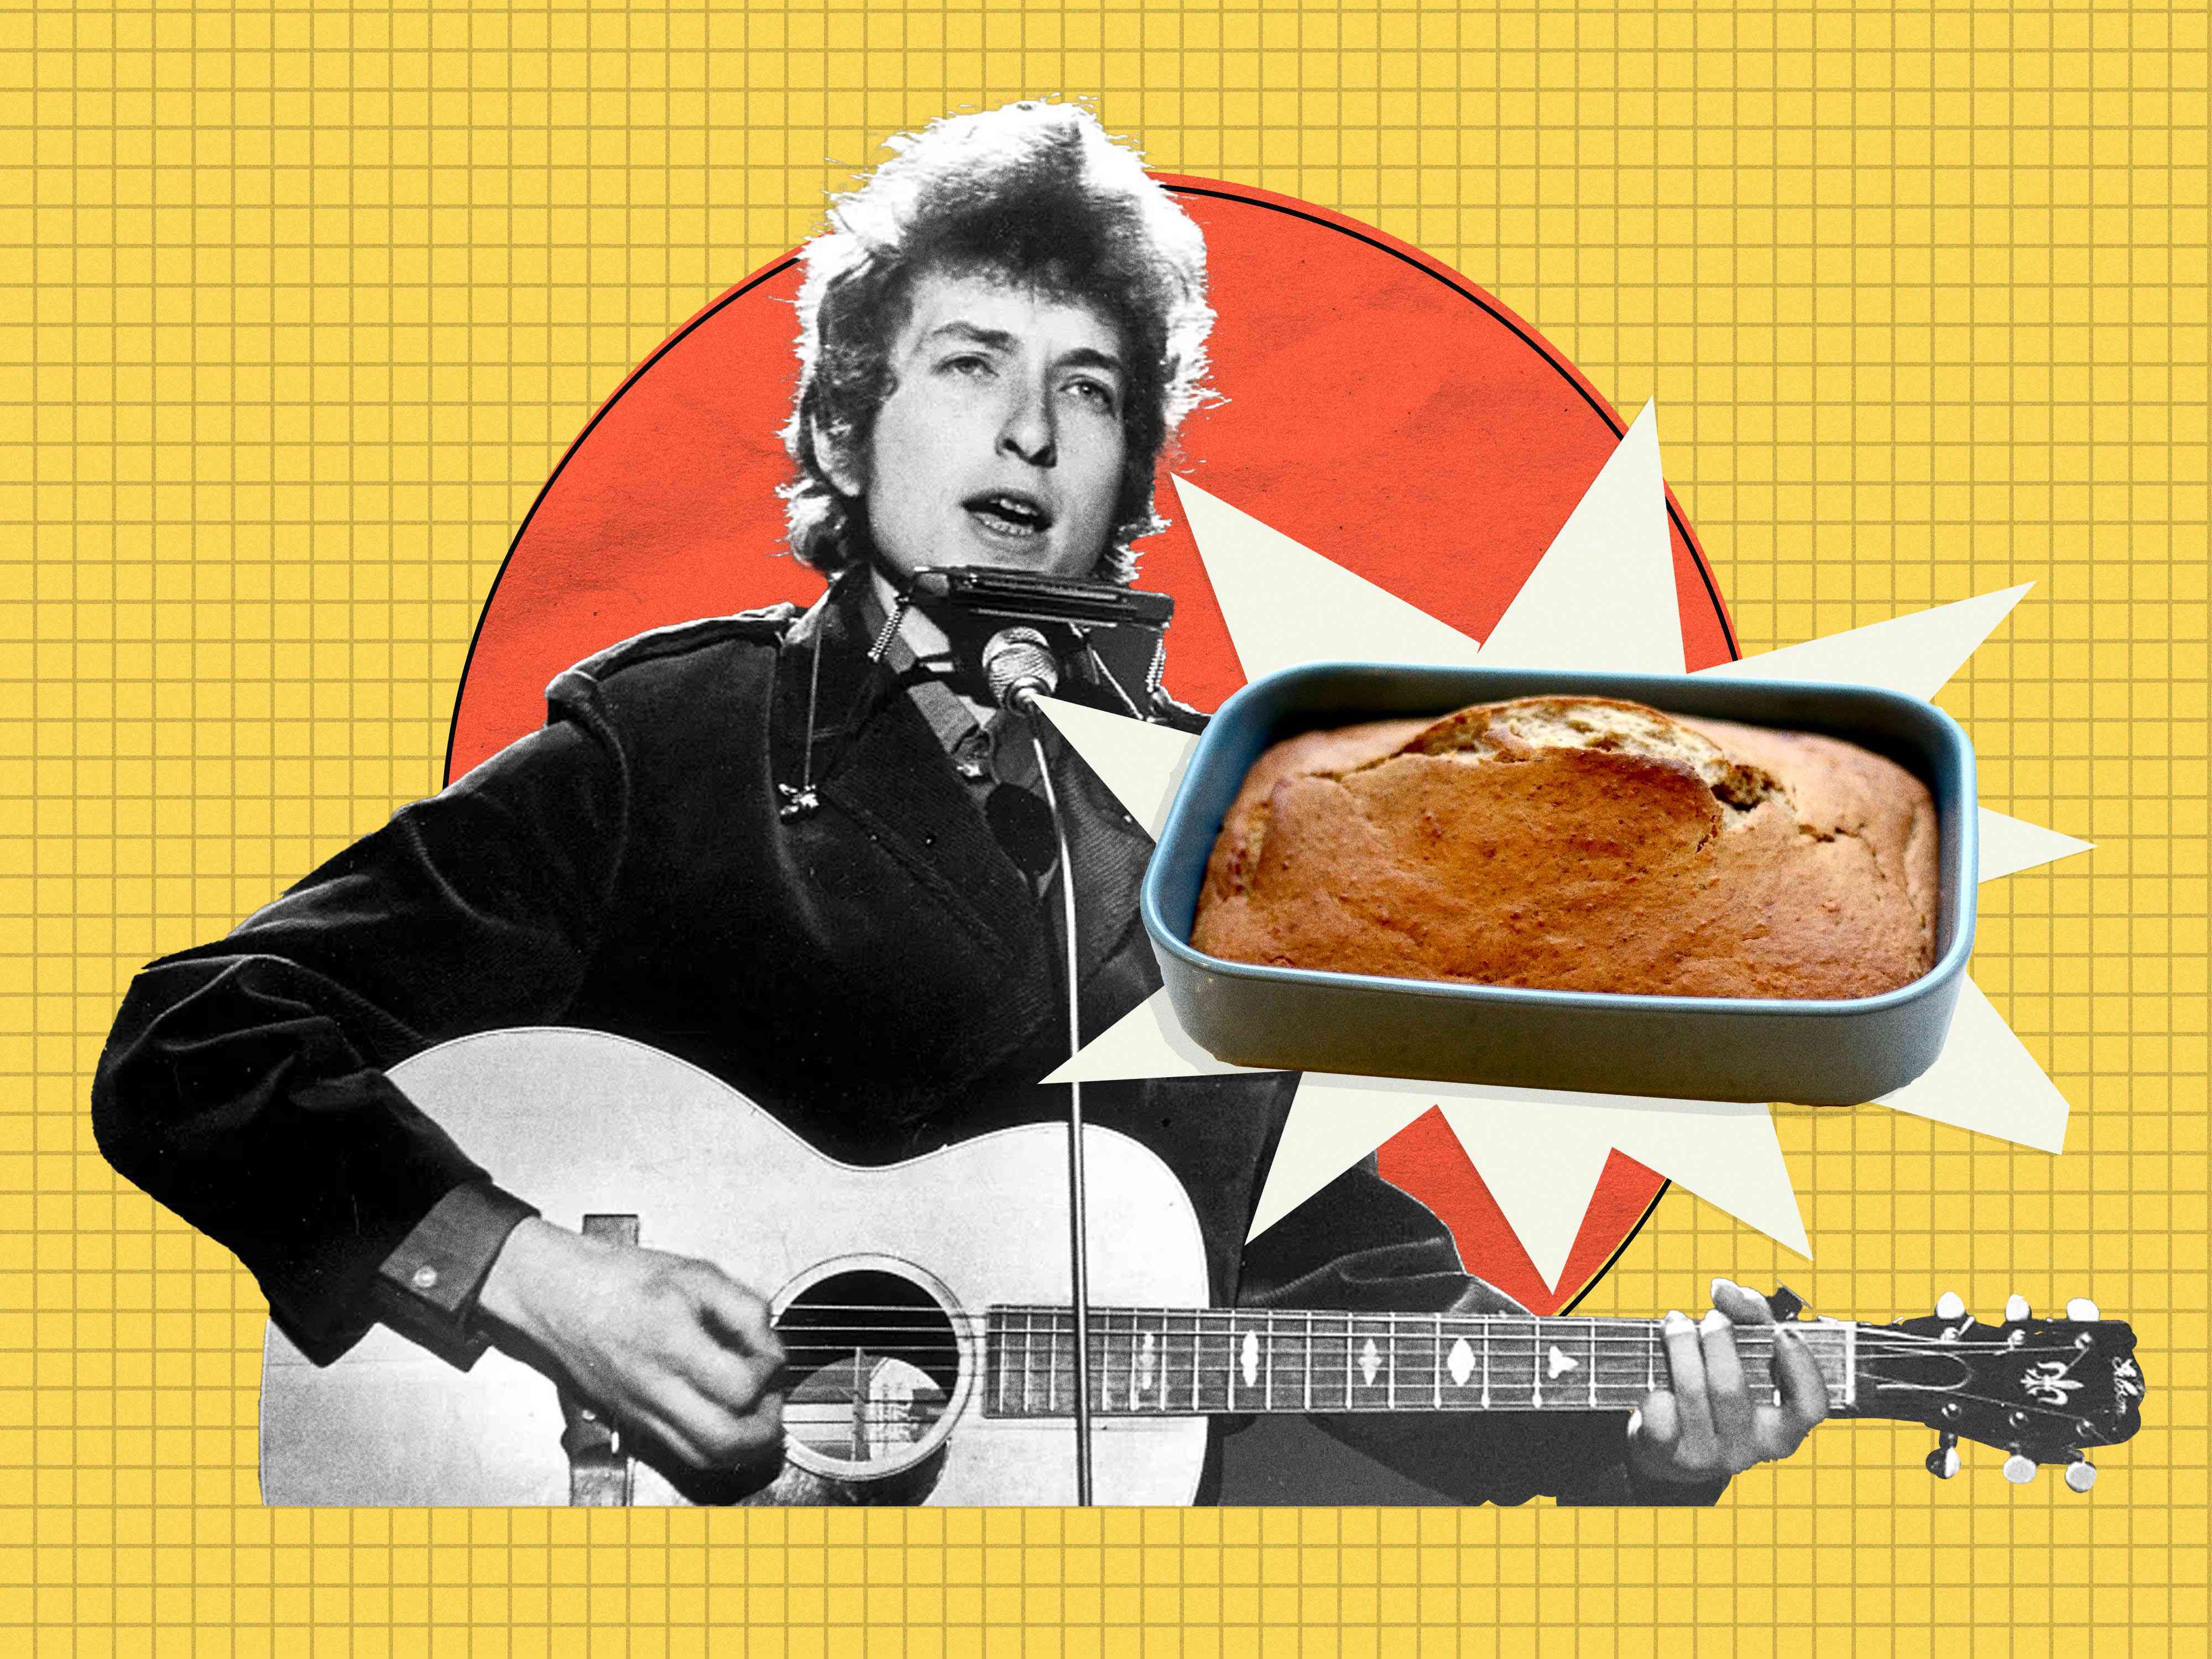 Bob Dylan's Mom's Banana Bread Was Always a Family Favorite